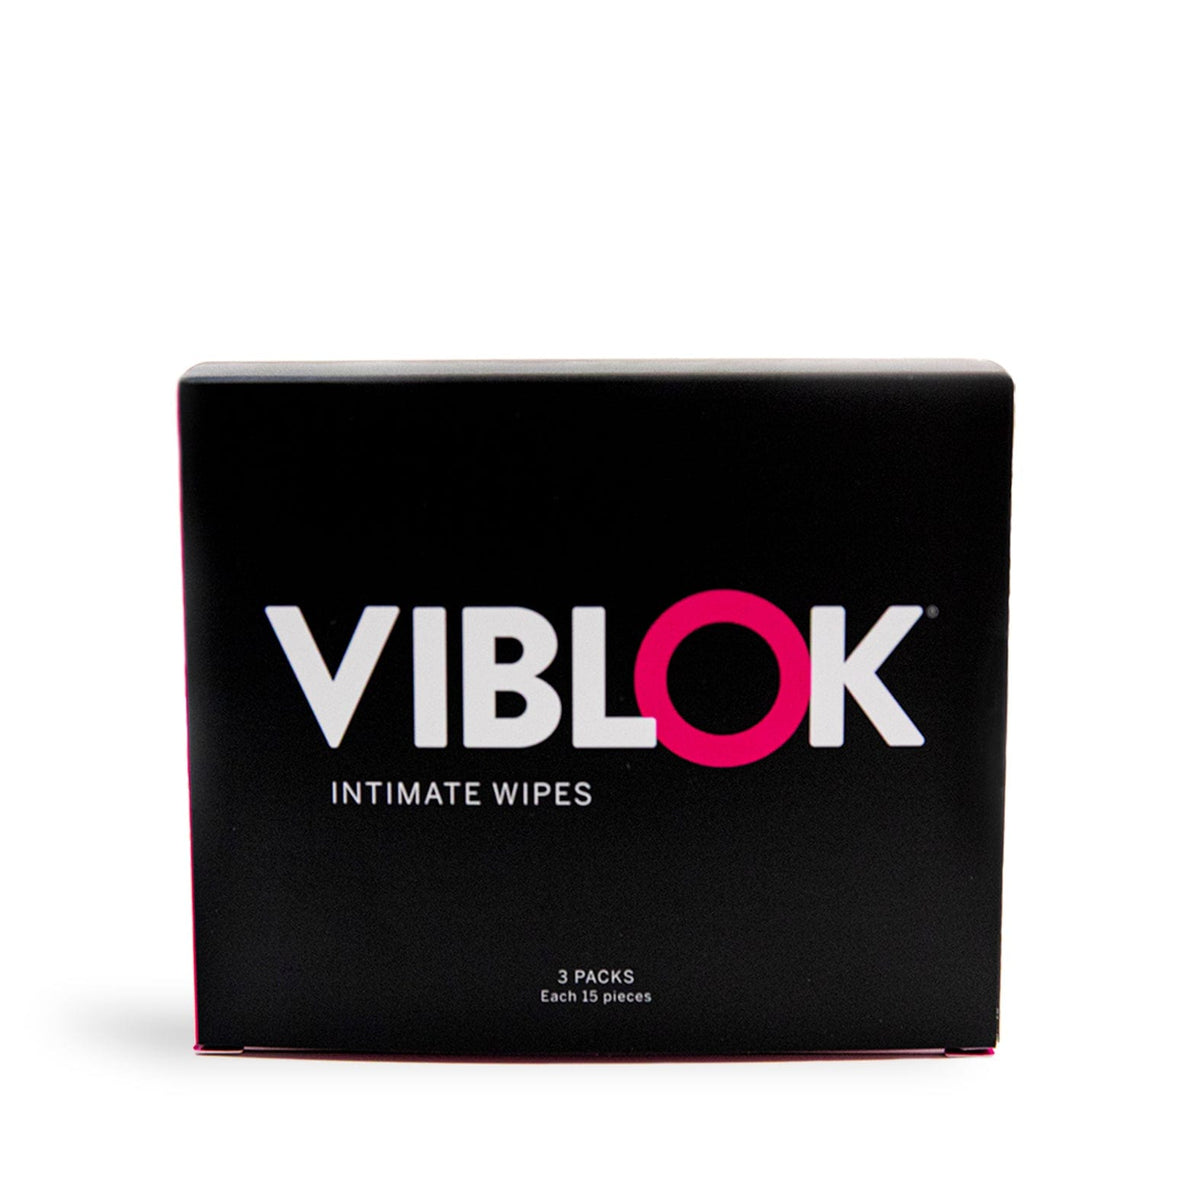 Black box of VIBLOK Intimate Wipes that contains 3 single packages